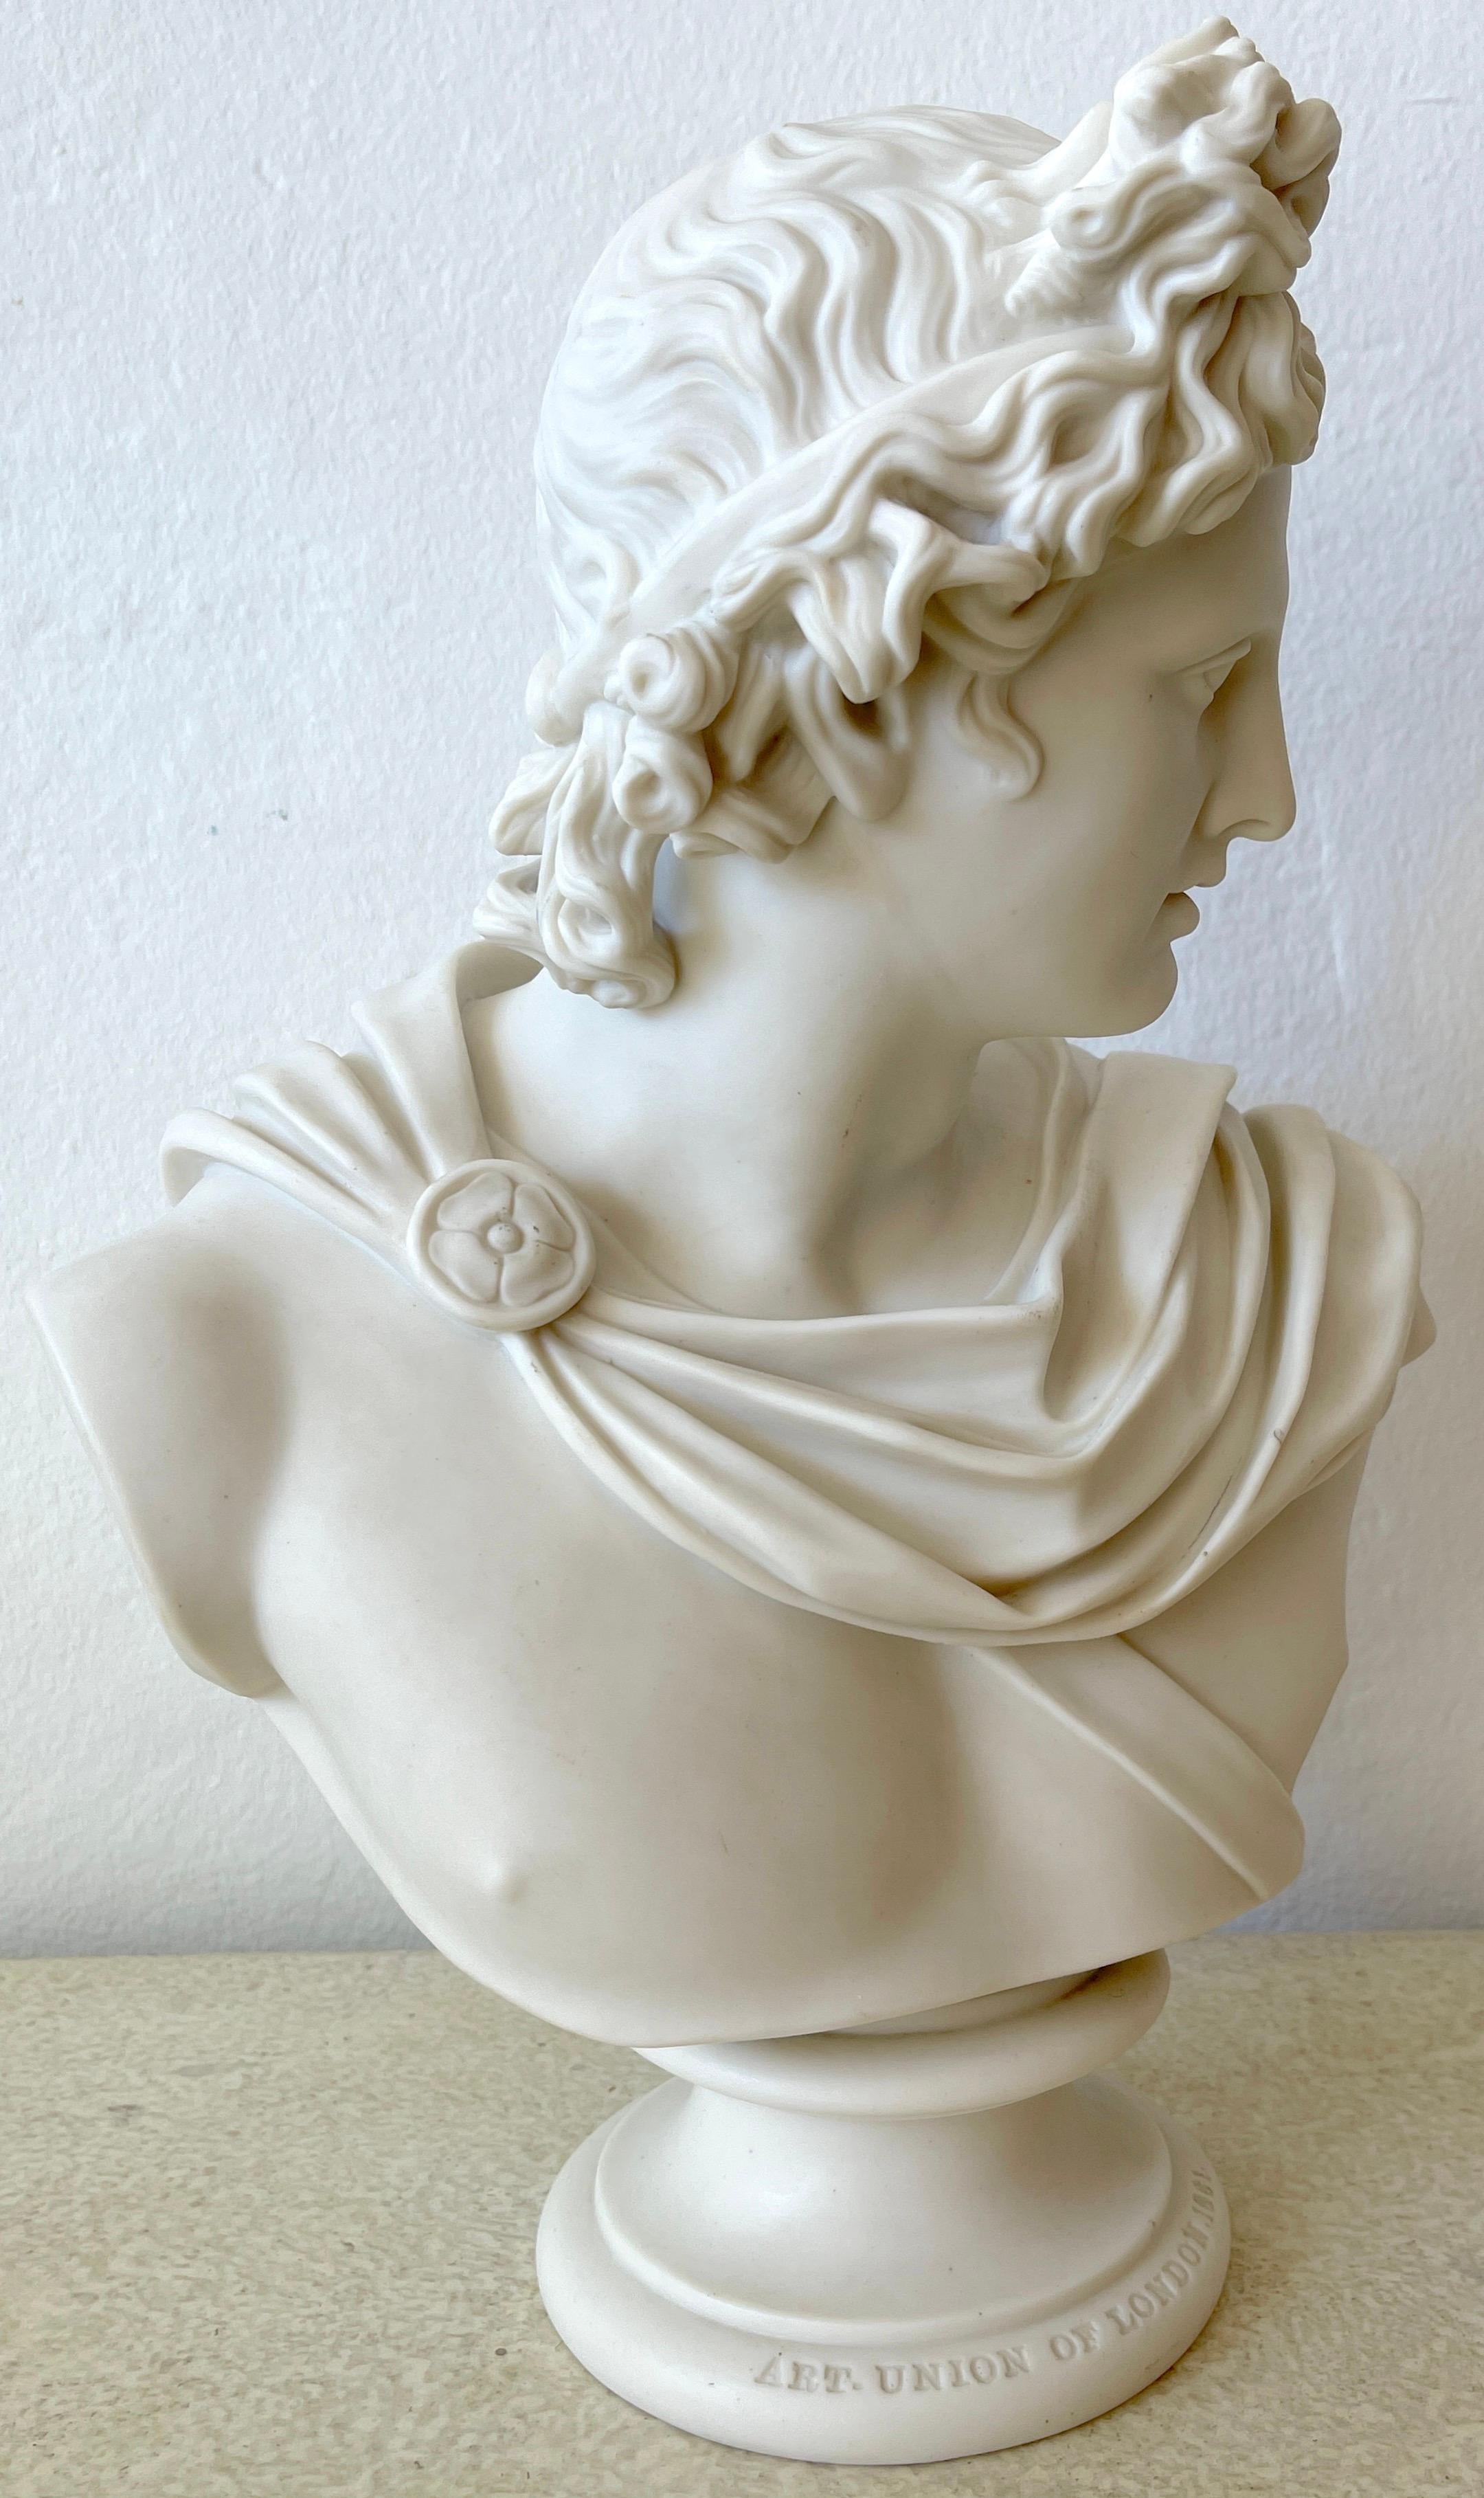 19th Century Art Union of London Parian Bust of Apollo Belvedere, by C. Delpech, 1861